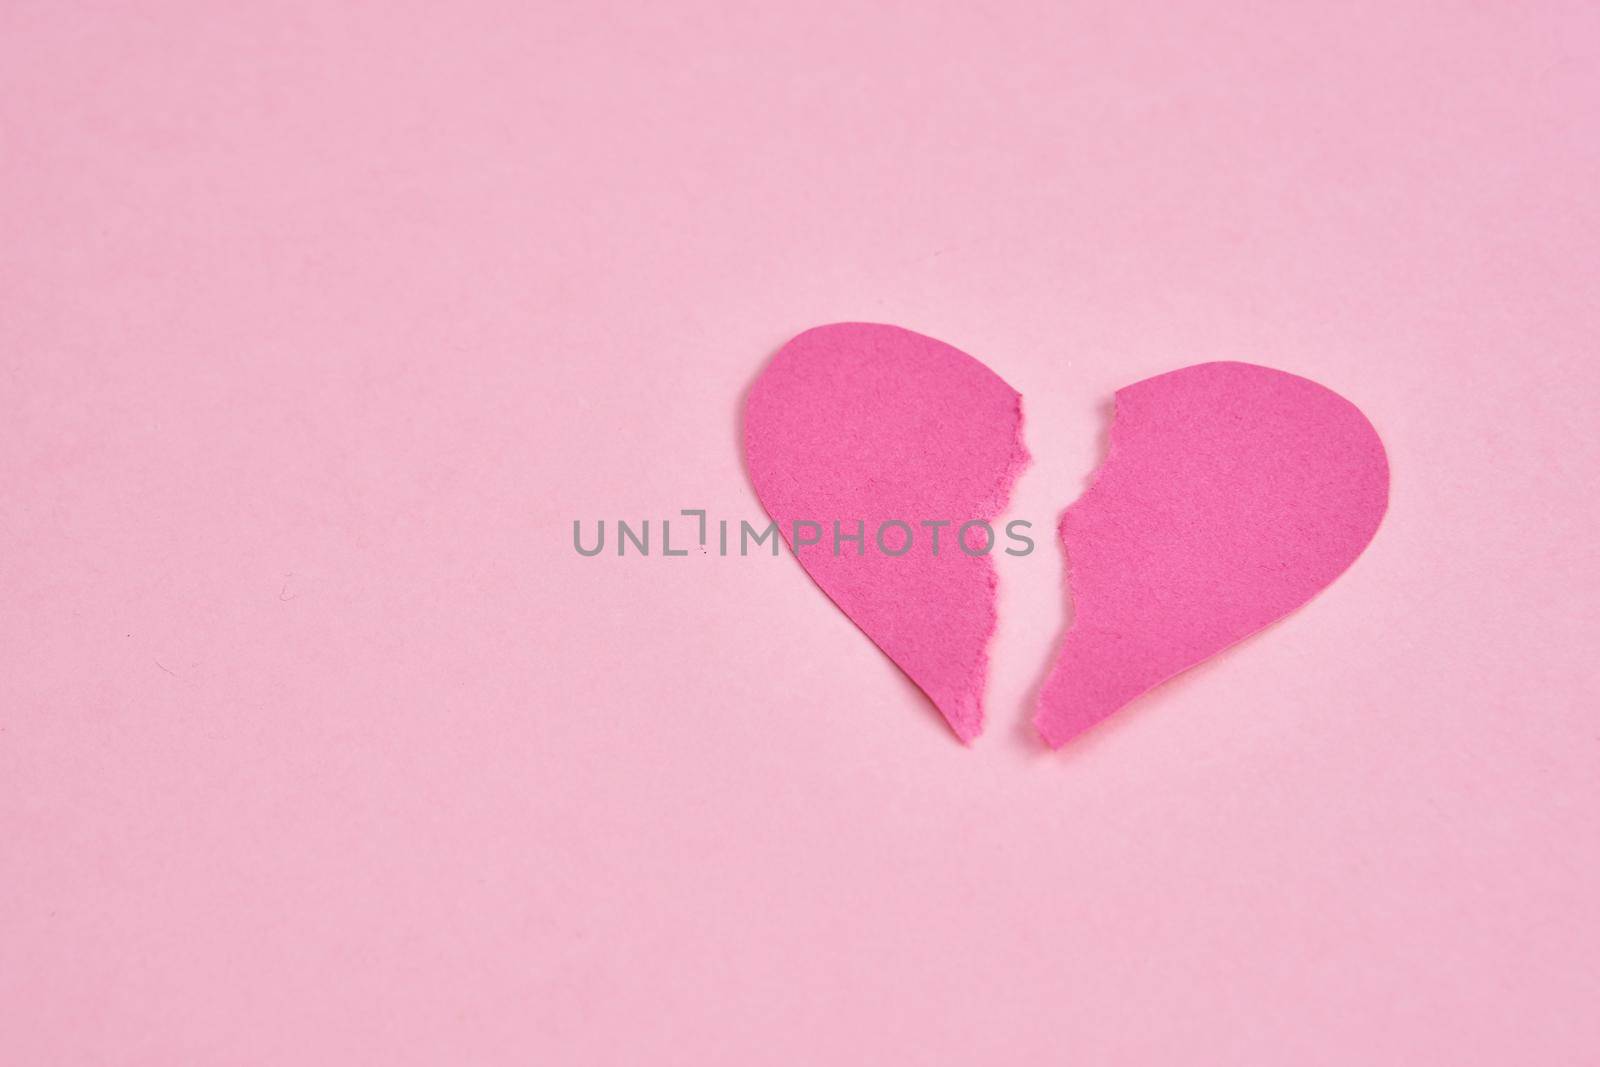 valentines paper heart romance holiday pink background. High quality photo